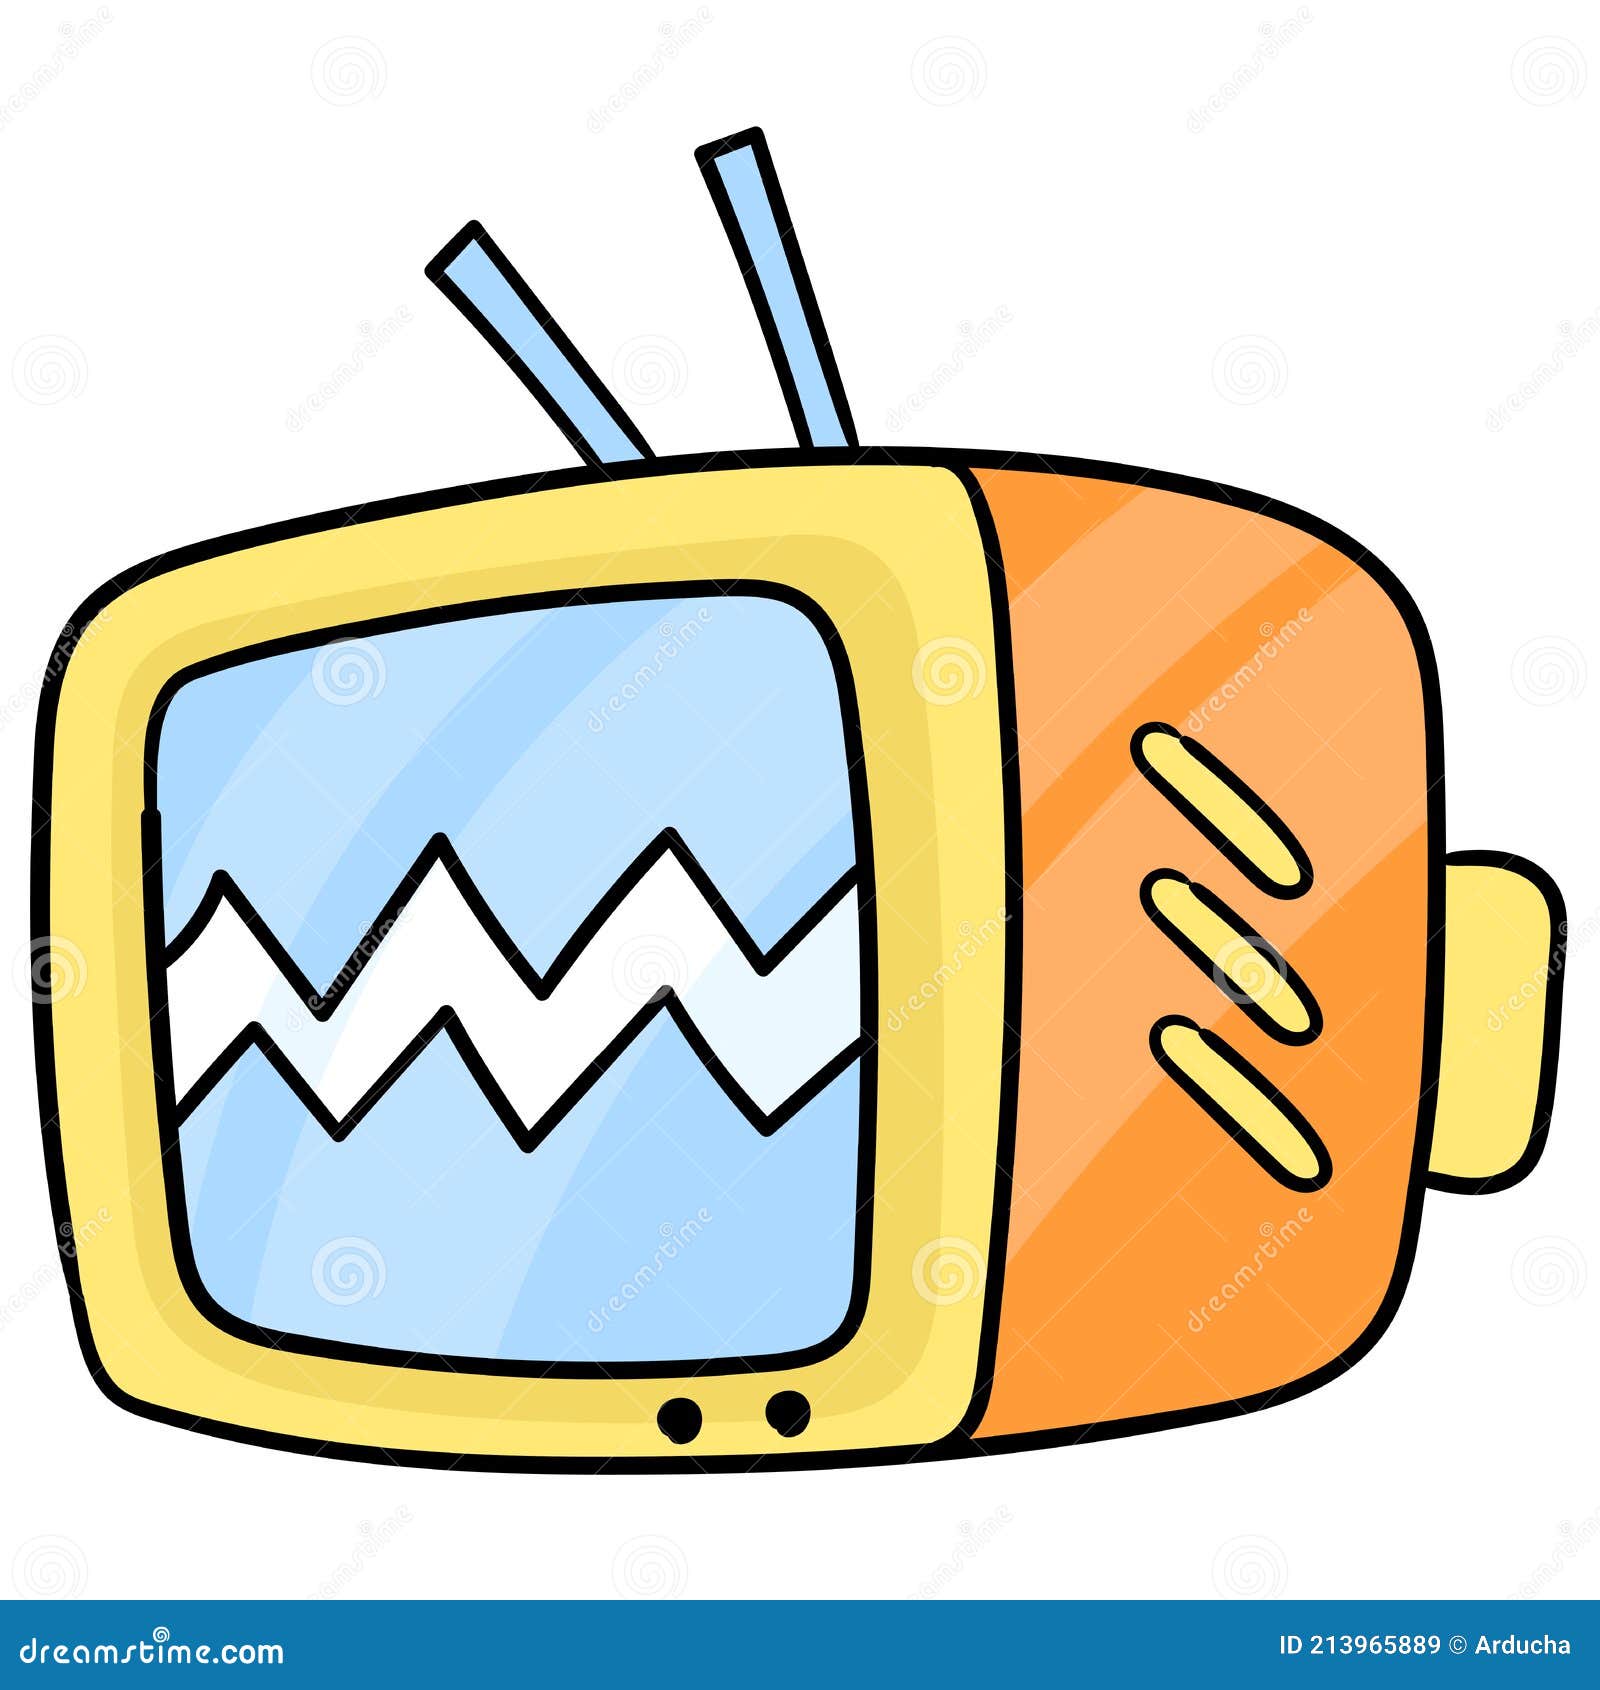 Television Box Electronic Object. Carton Emoticon Stock Vector -  Illustration of object, design: 213965889